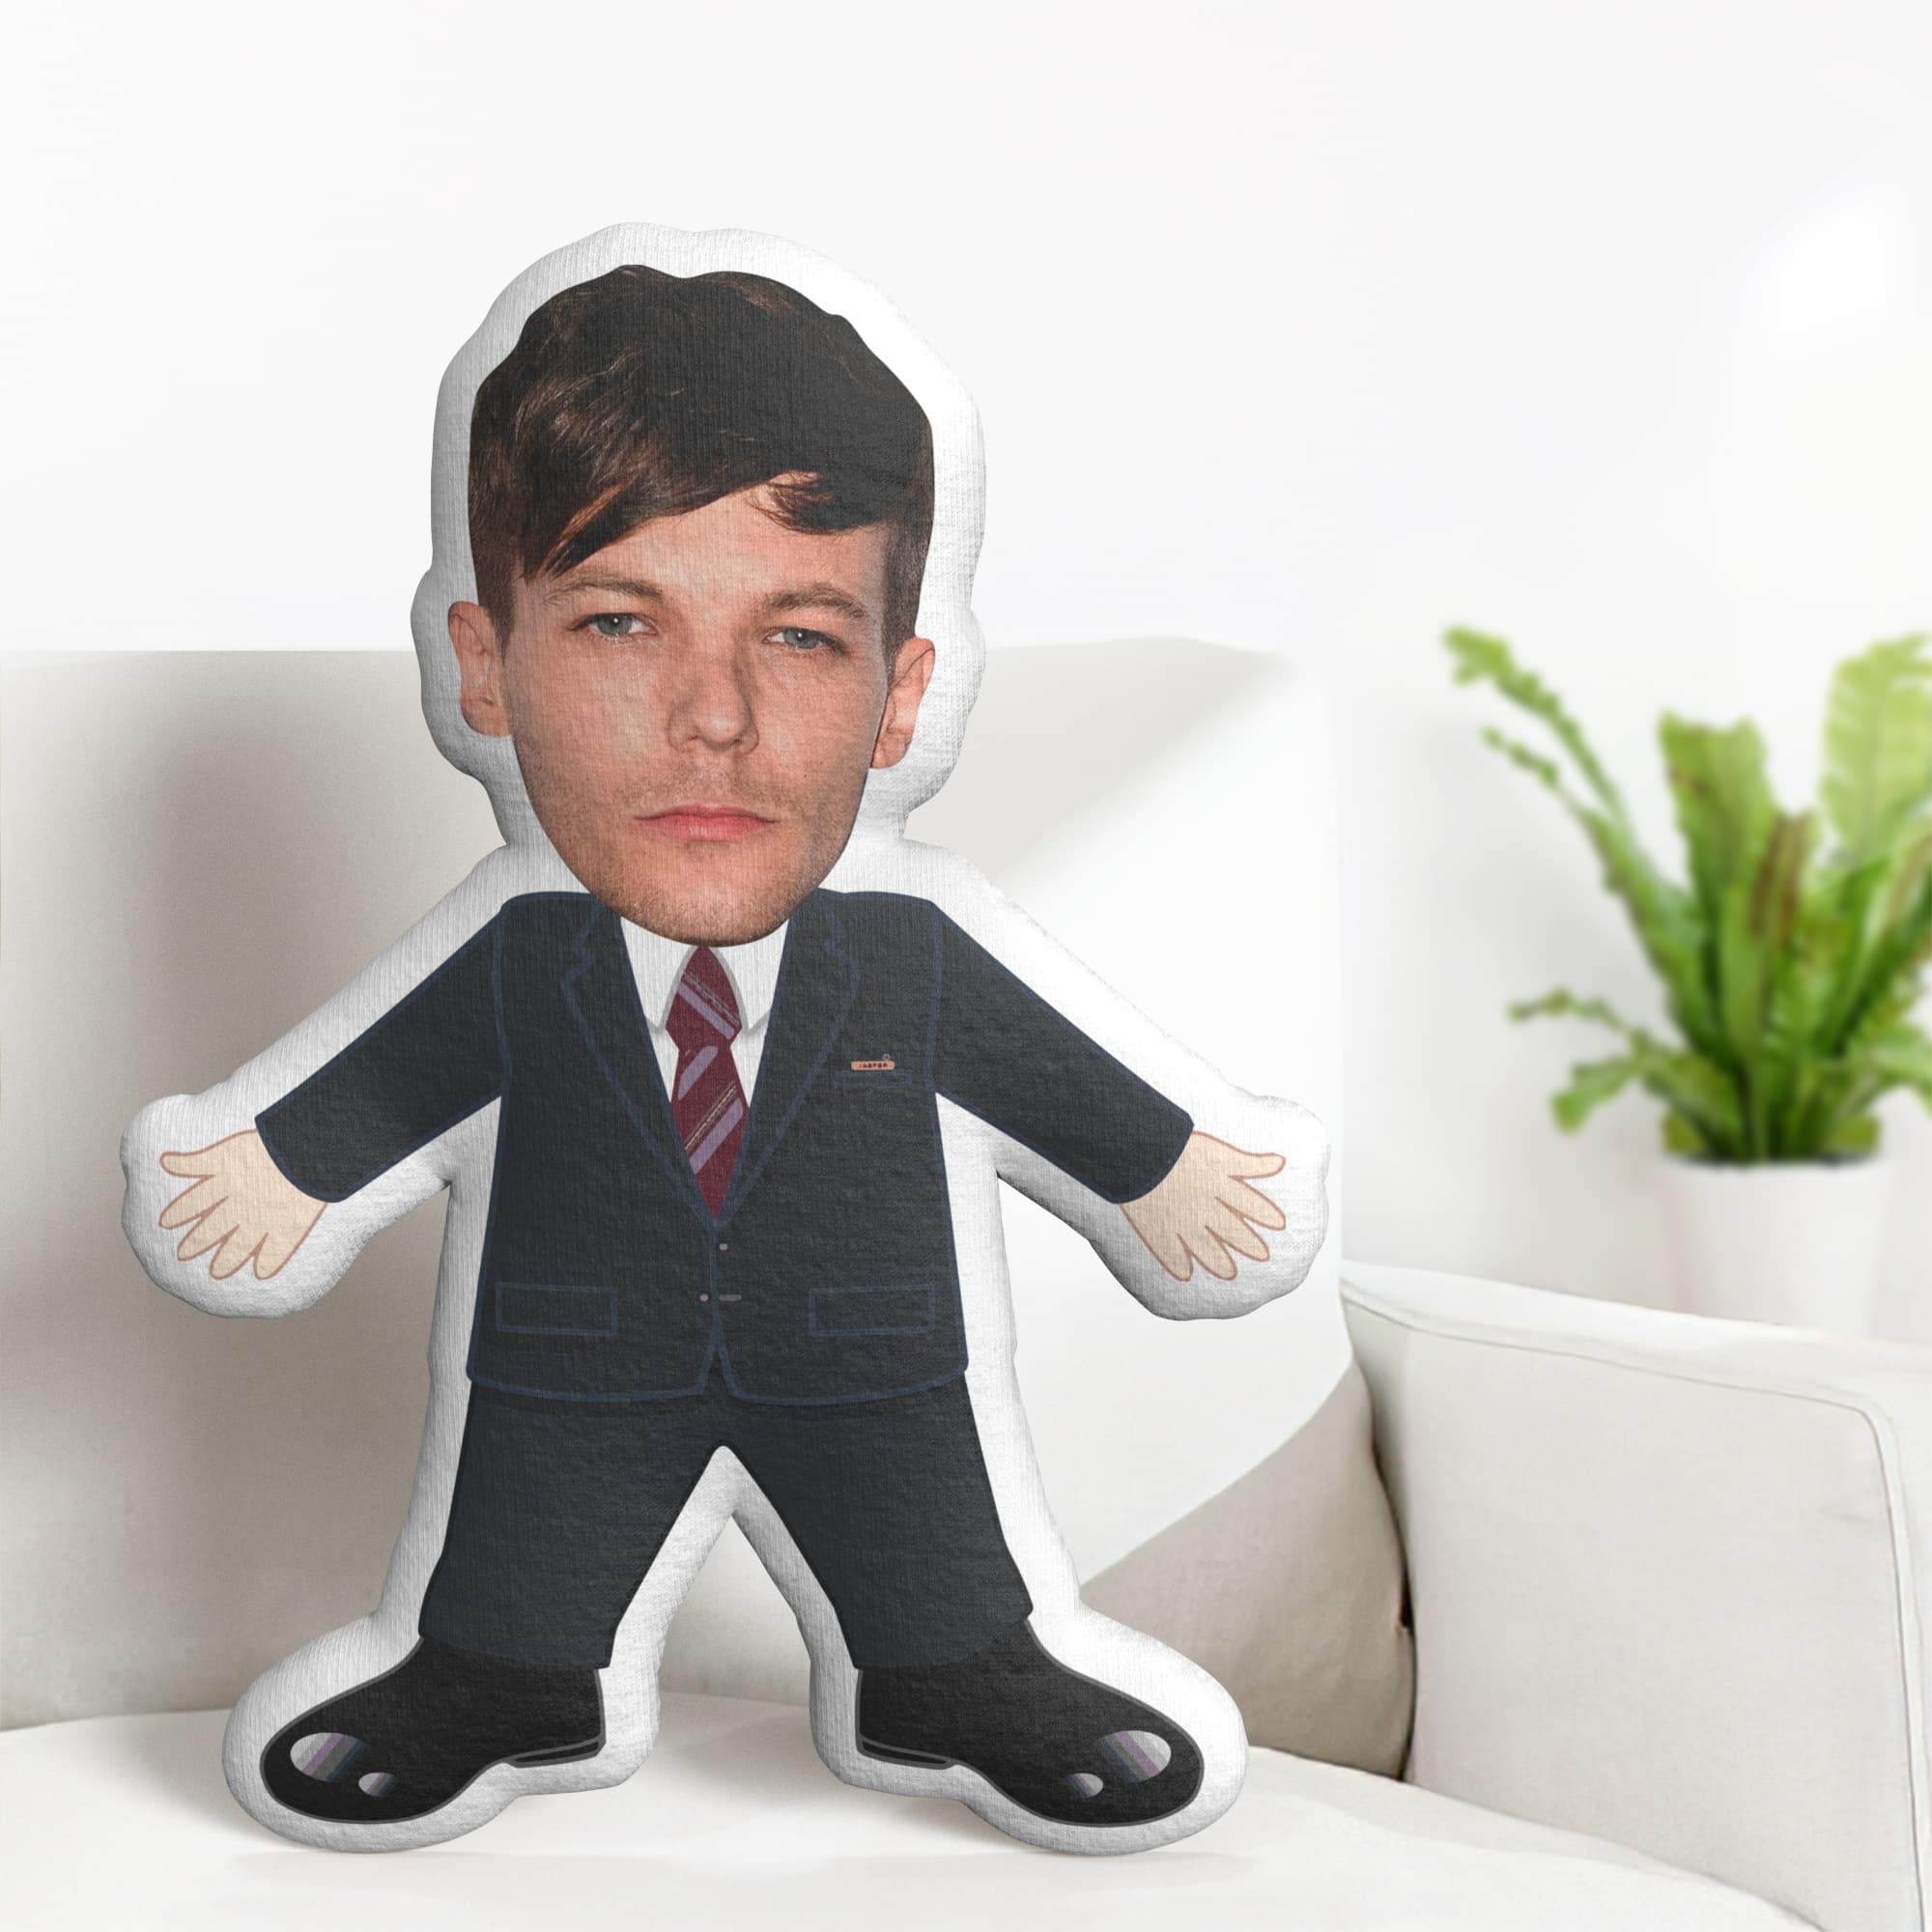 Louis Tomlinson Throw Blankets for Sale